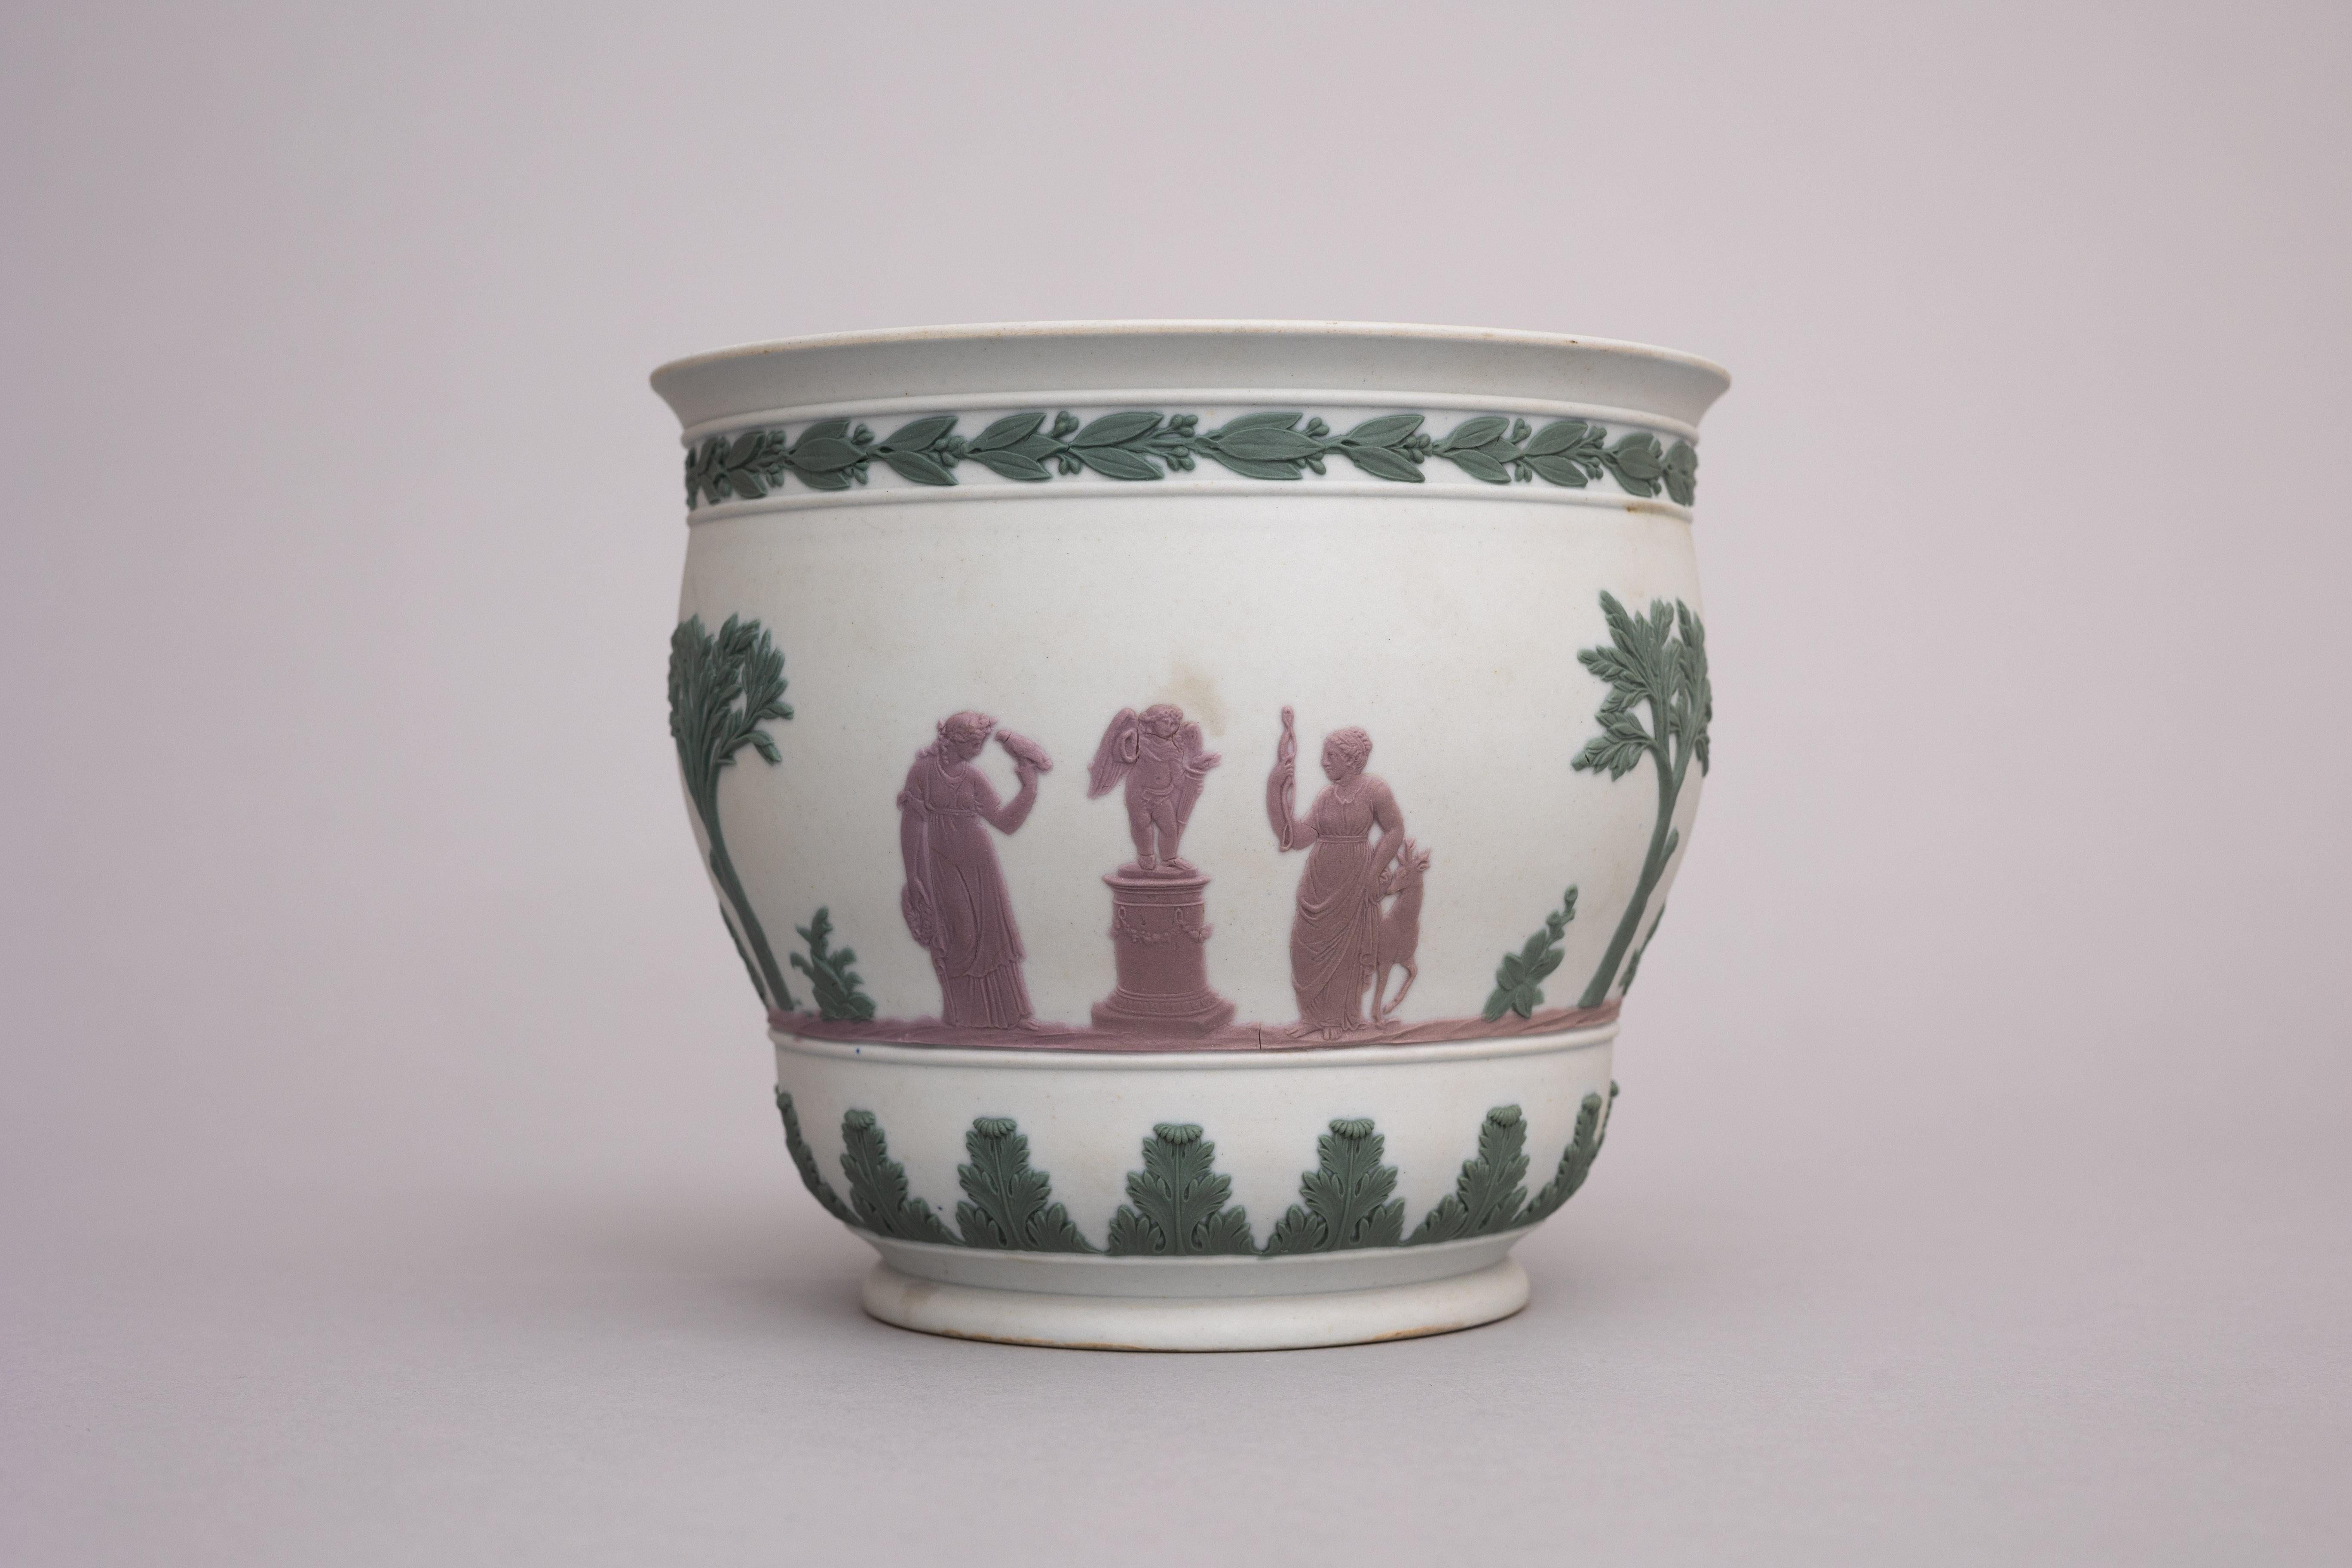 Neoclassical Early 19th Century Wedgwood Tricolor Jasperware Jardiniere For Sale